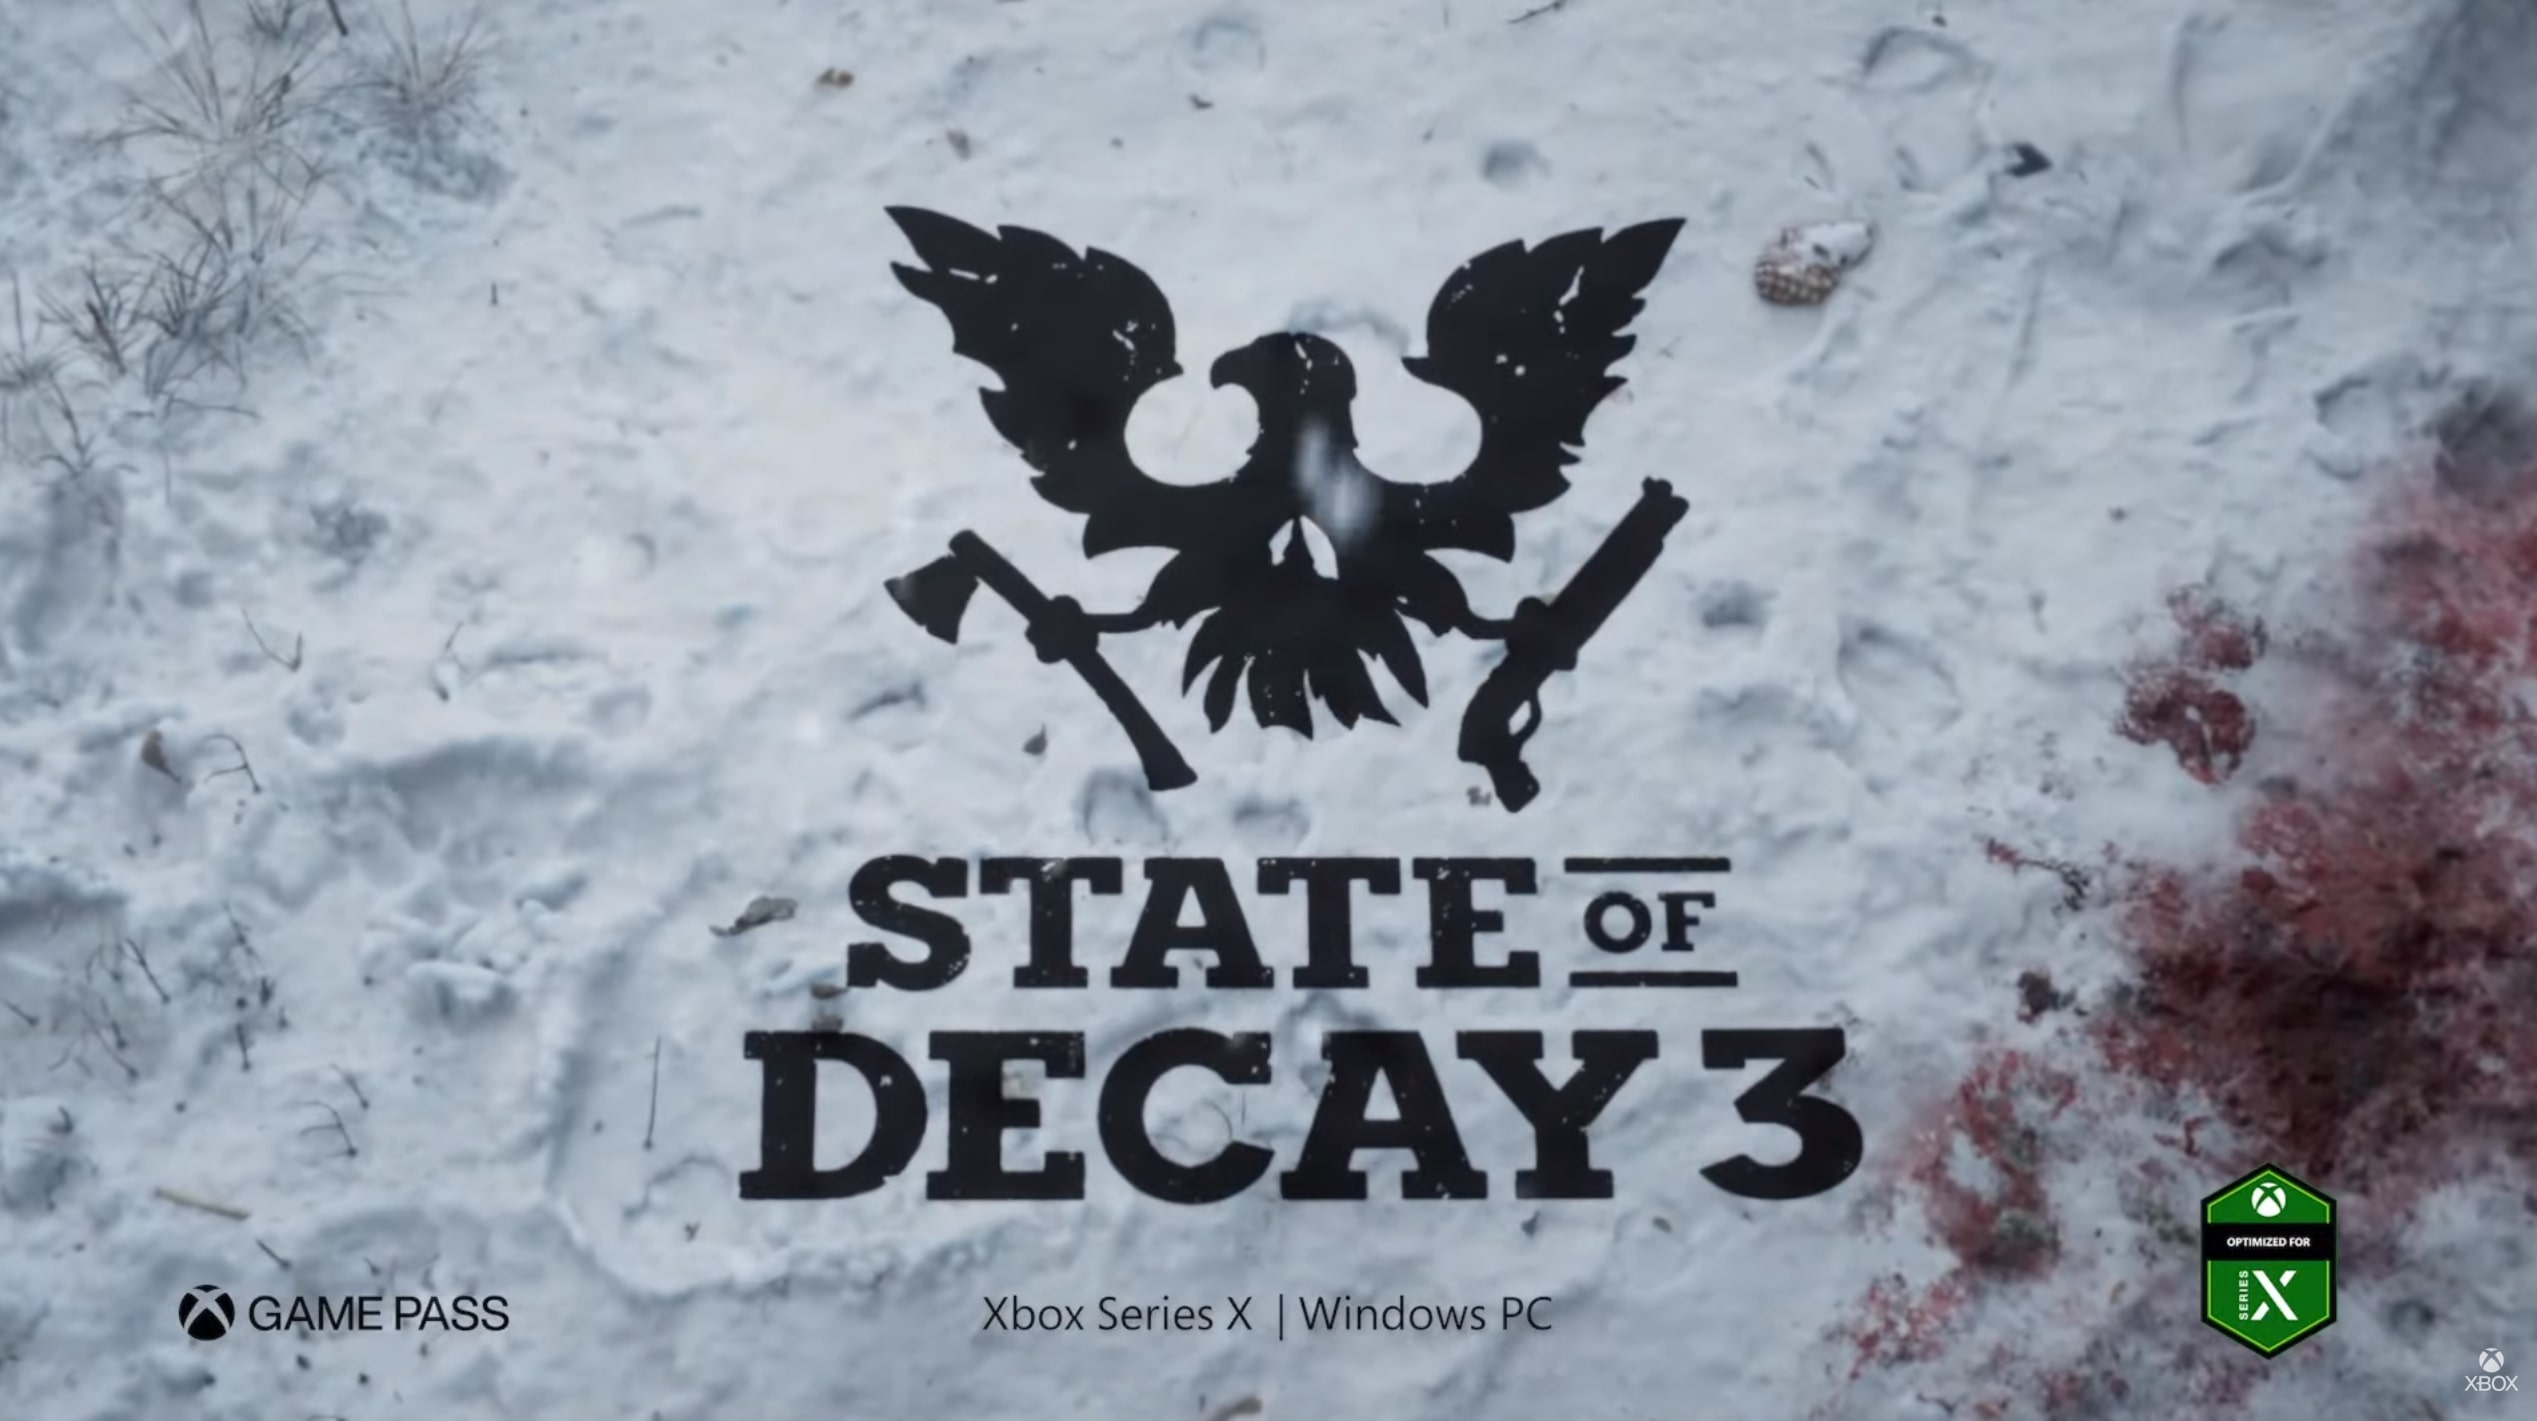 New State Of Decay 3 Gameplay Trailer At Xbox Games Showcase. 